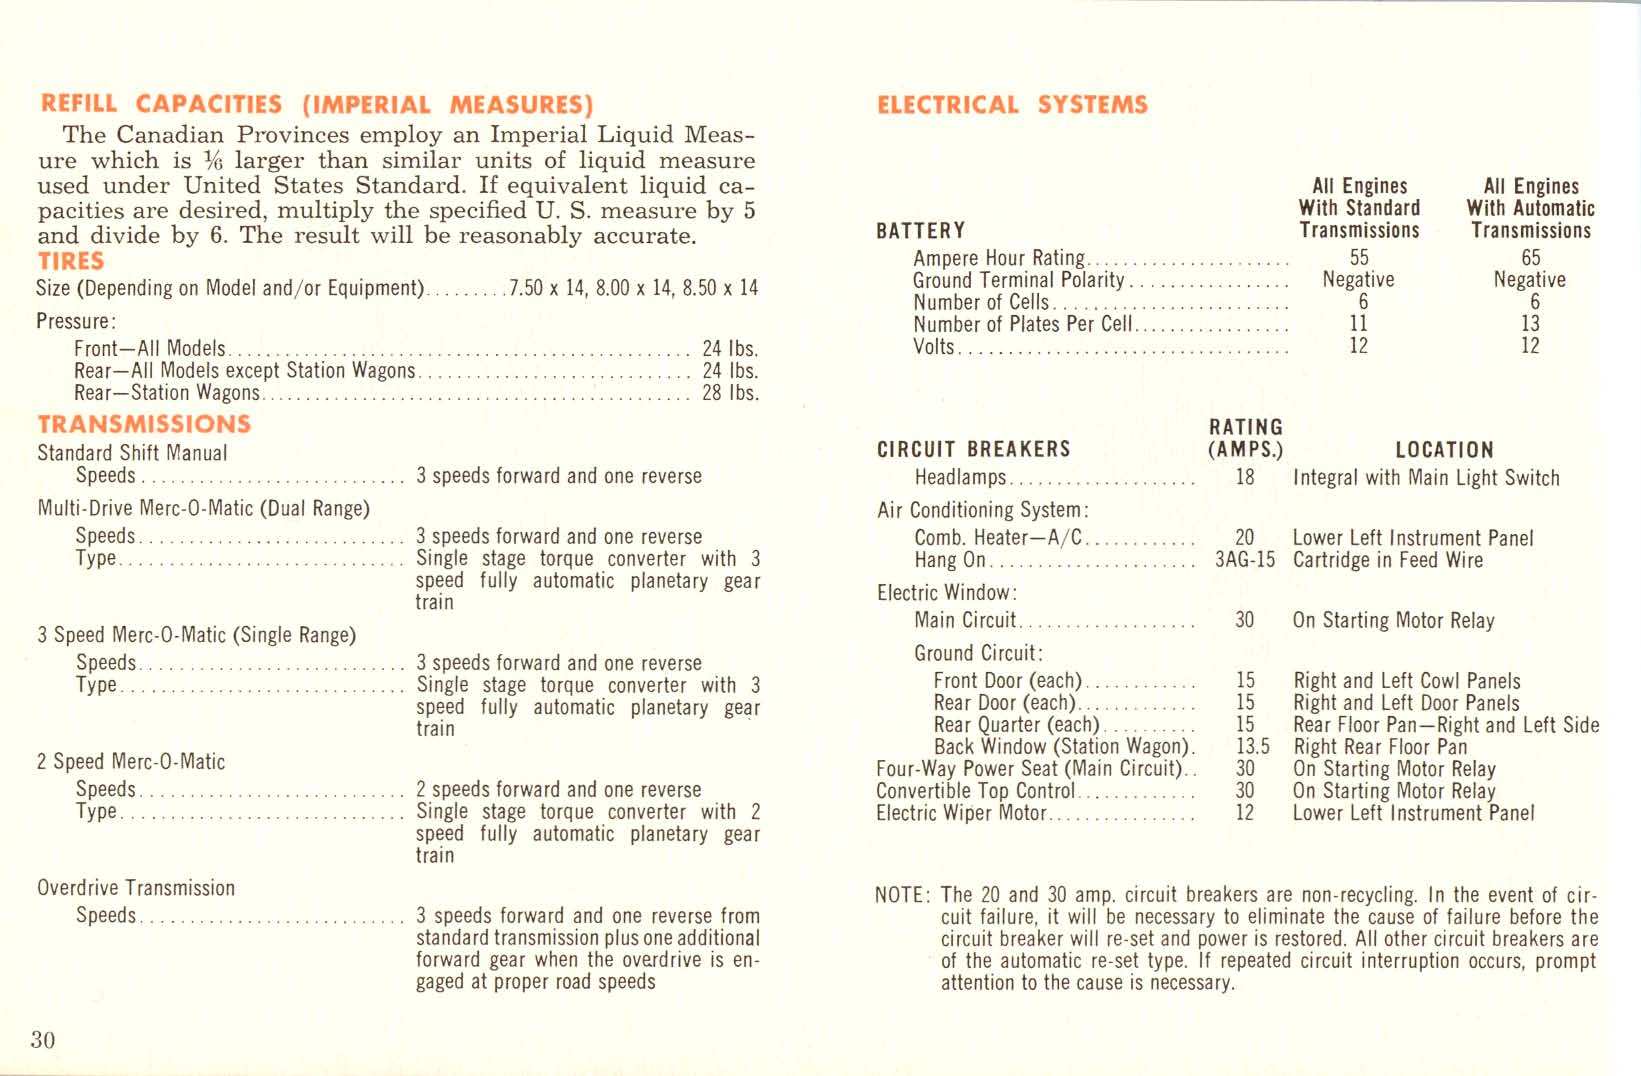 1961 Mercury Owners Manual Page 25